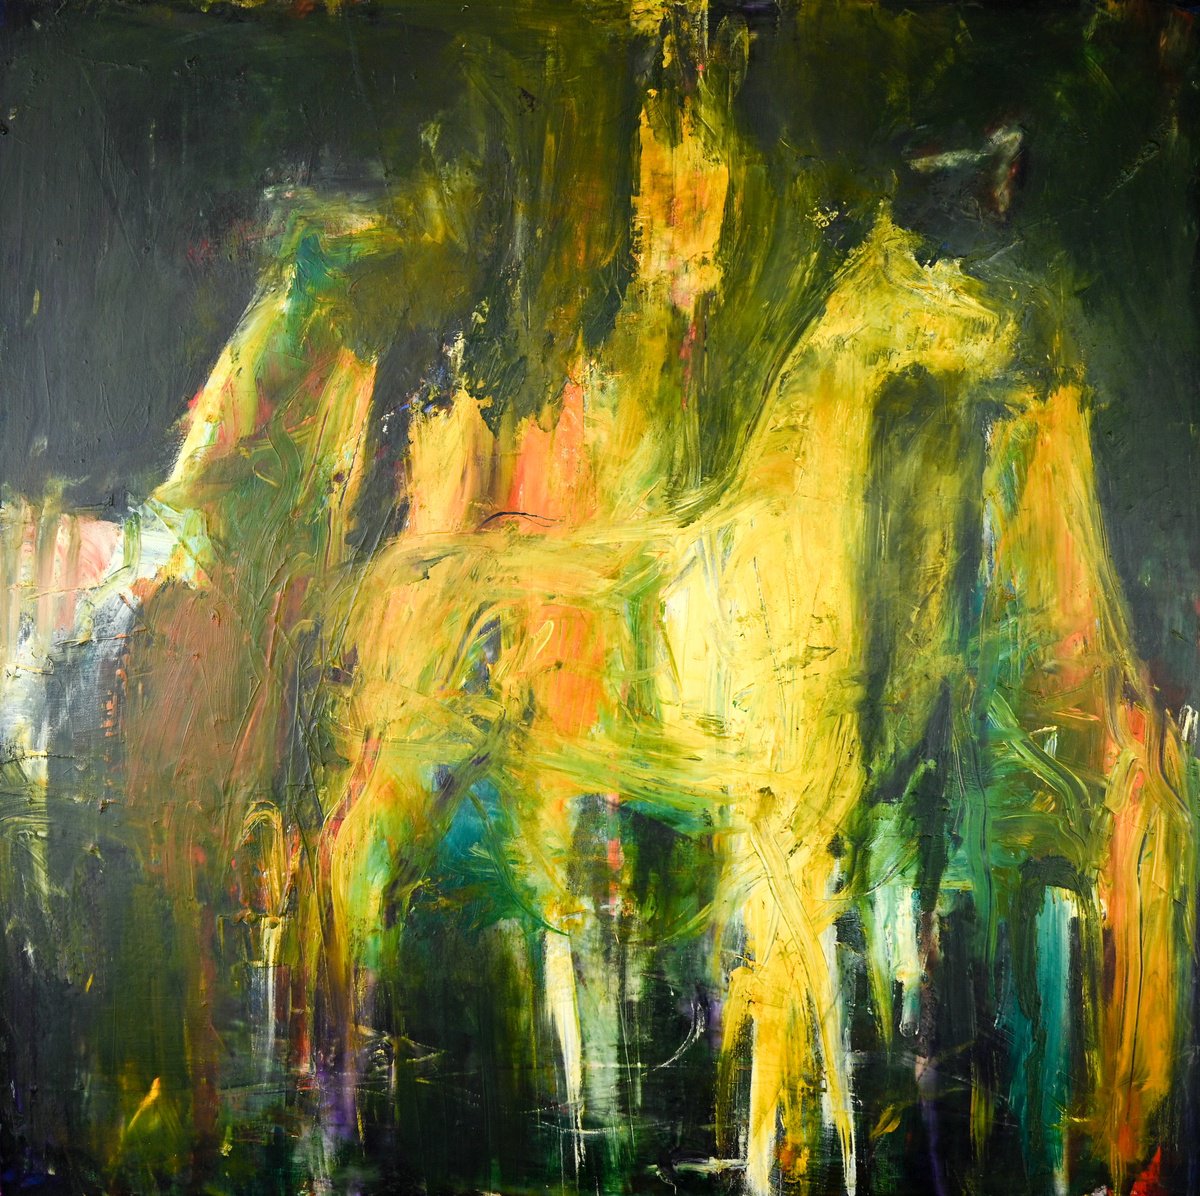 In The Presence Of Horses 1 by Niki Hare